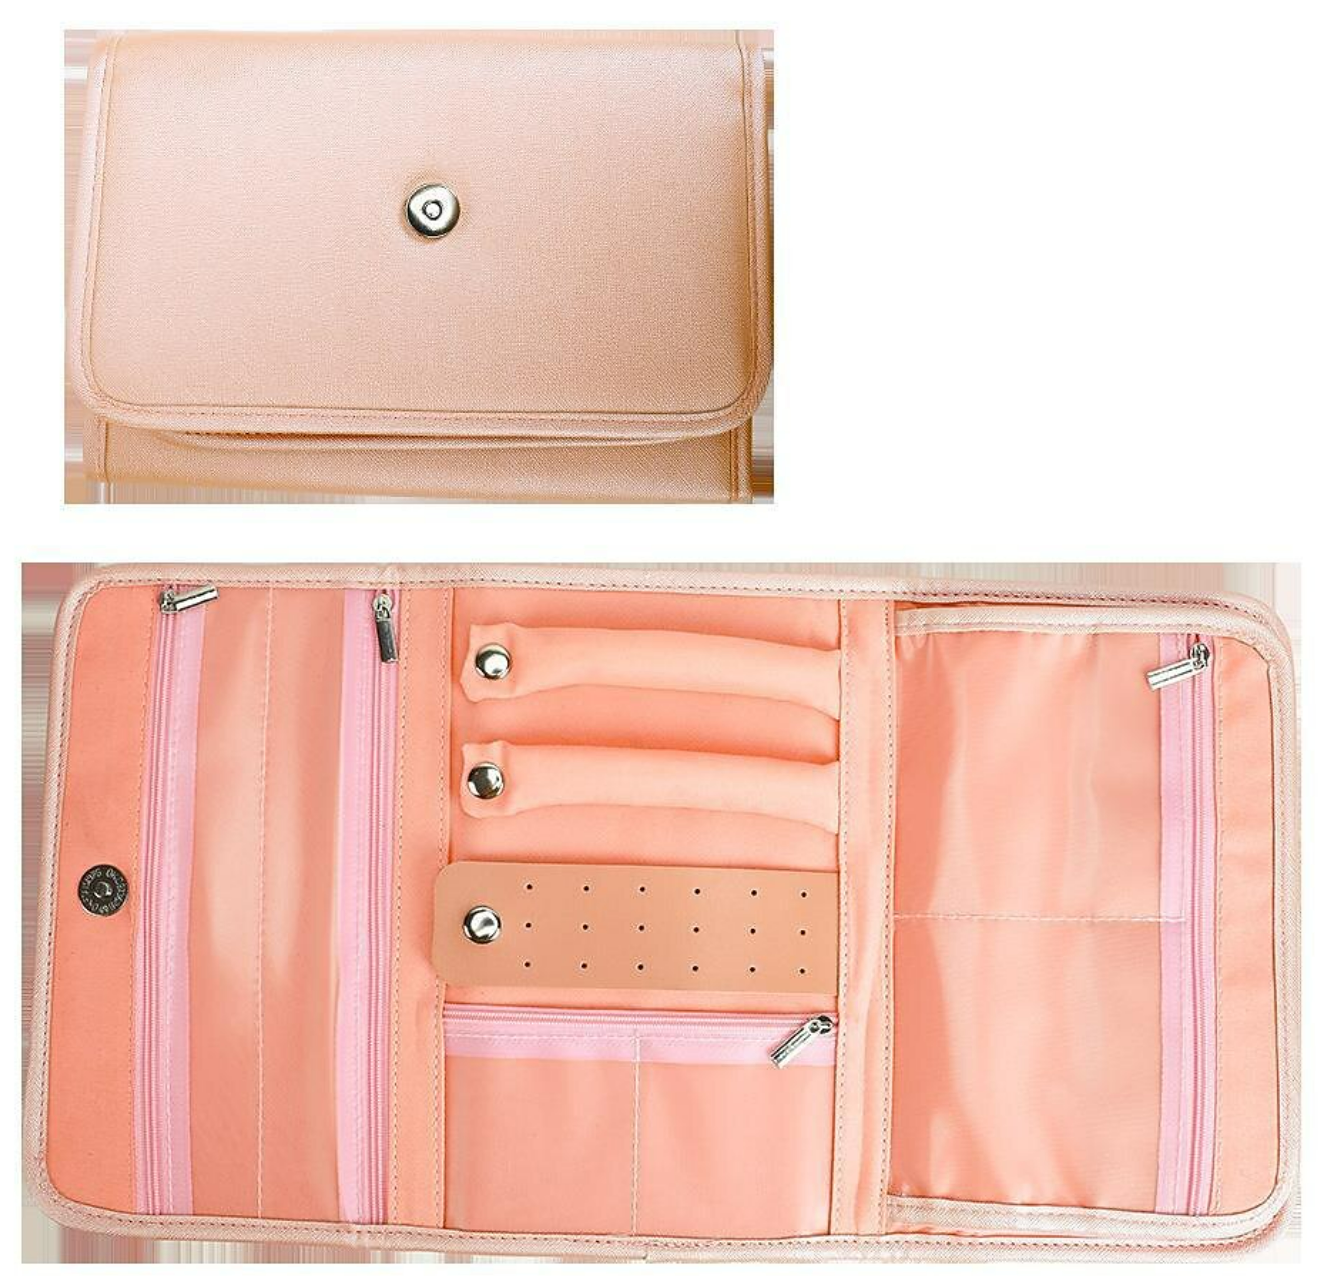 New Style Jewelry Storage Bag Various Kinds Of Jewelry Storage Bag Pu Simple Folding Jewelry Bag